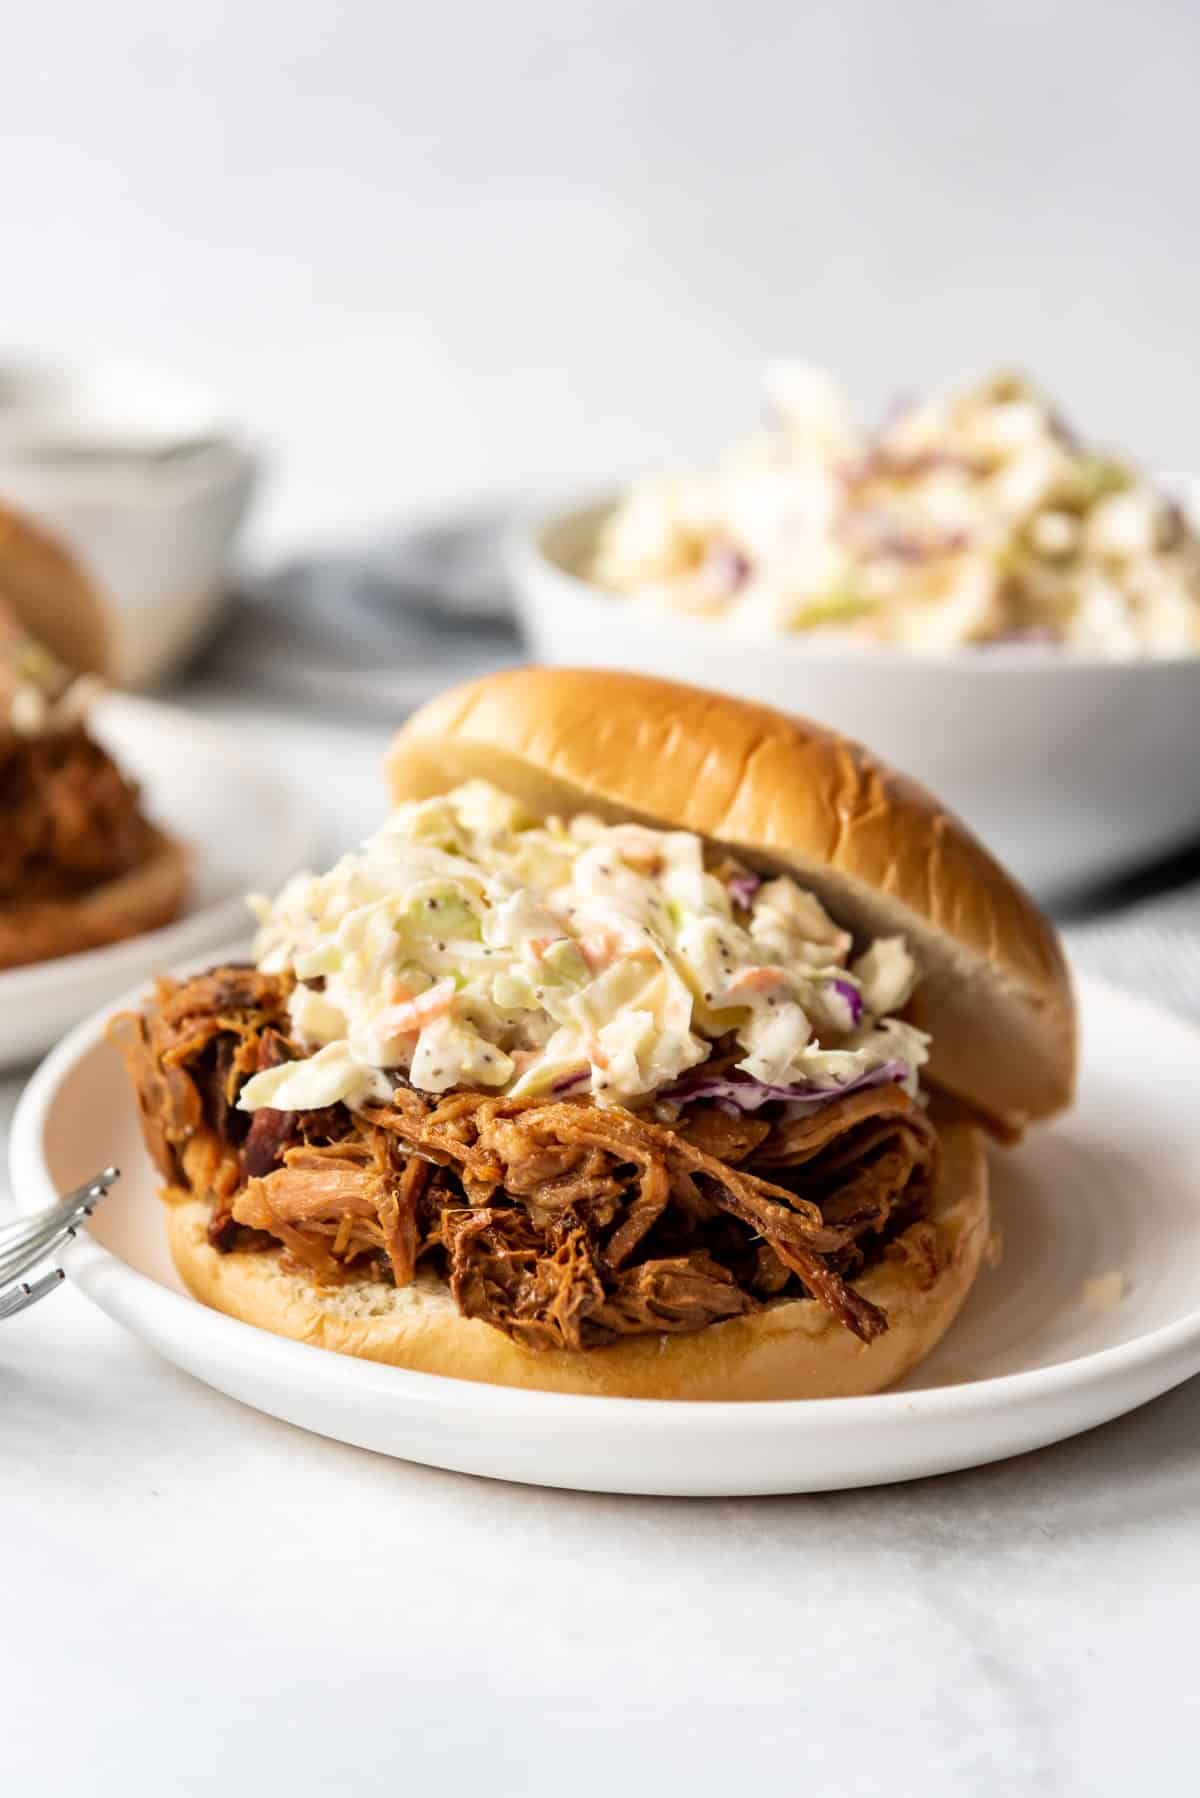 An apricot pulled pork sandwich topped with homemade coleslaw on a white plate.